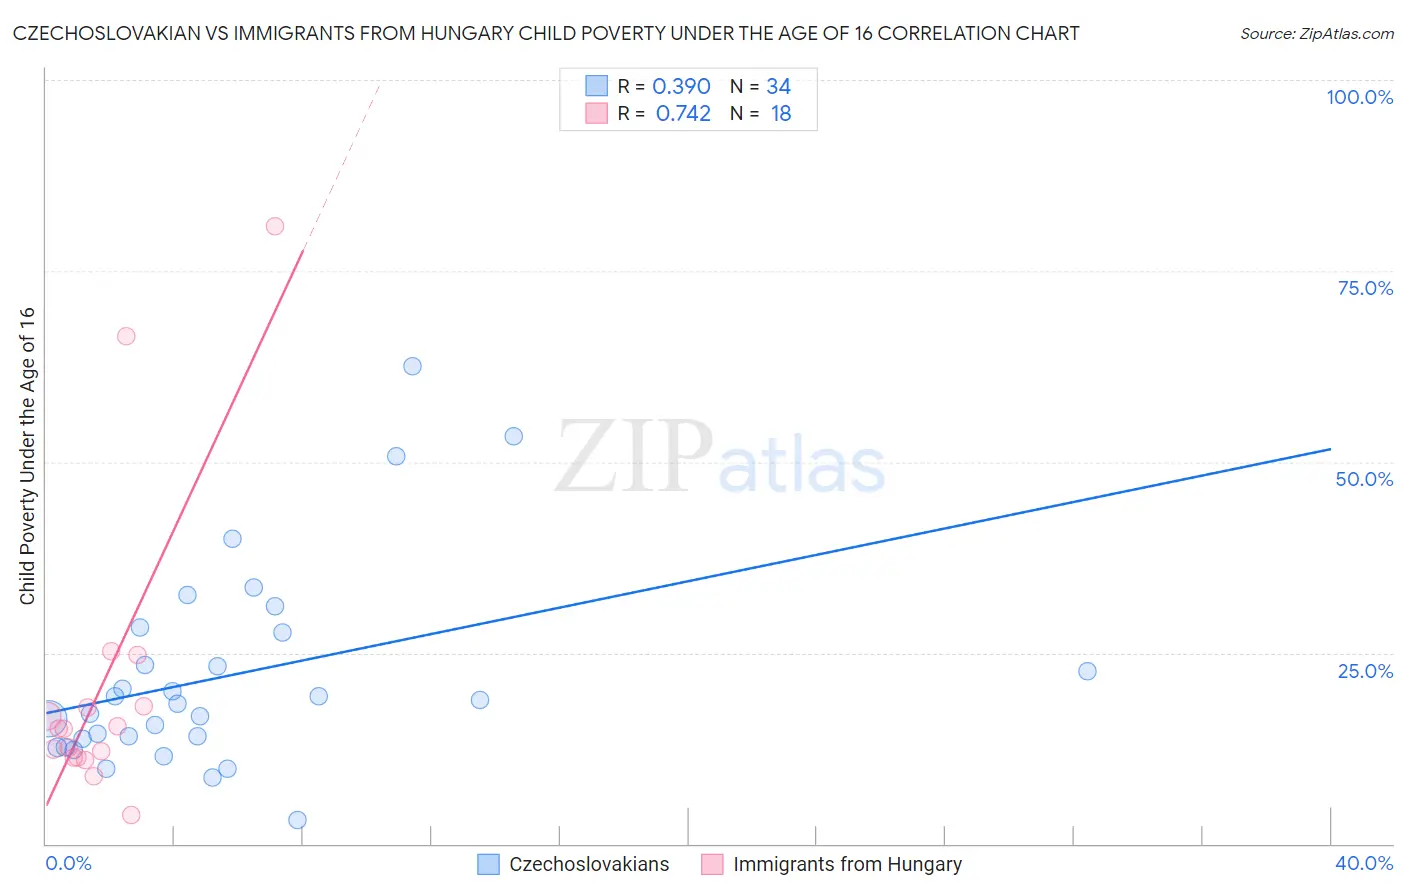 Czechoslovakian vs Immigrants from Hungary Child Poverty Under the Age of 16